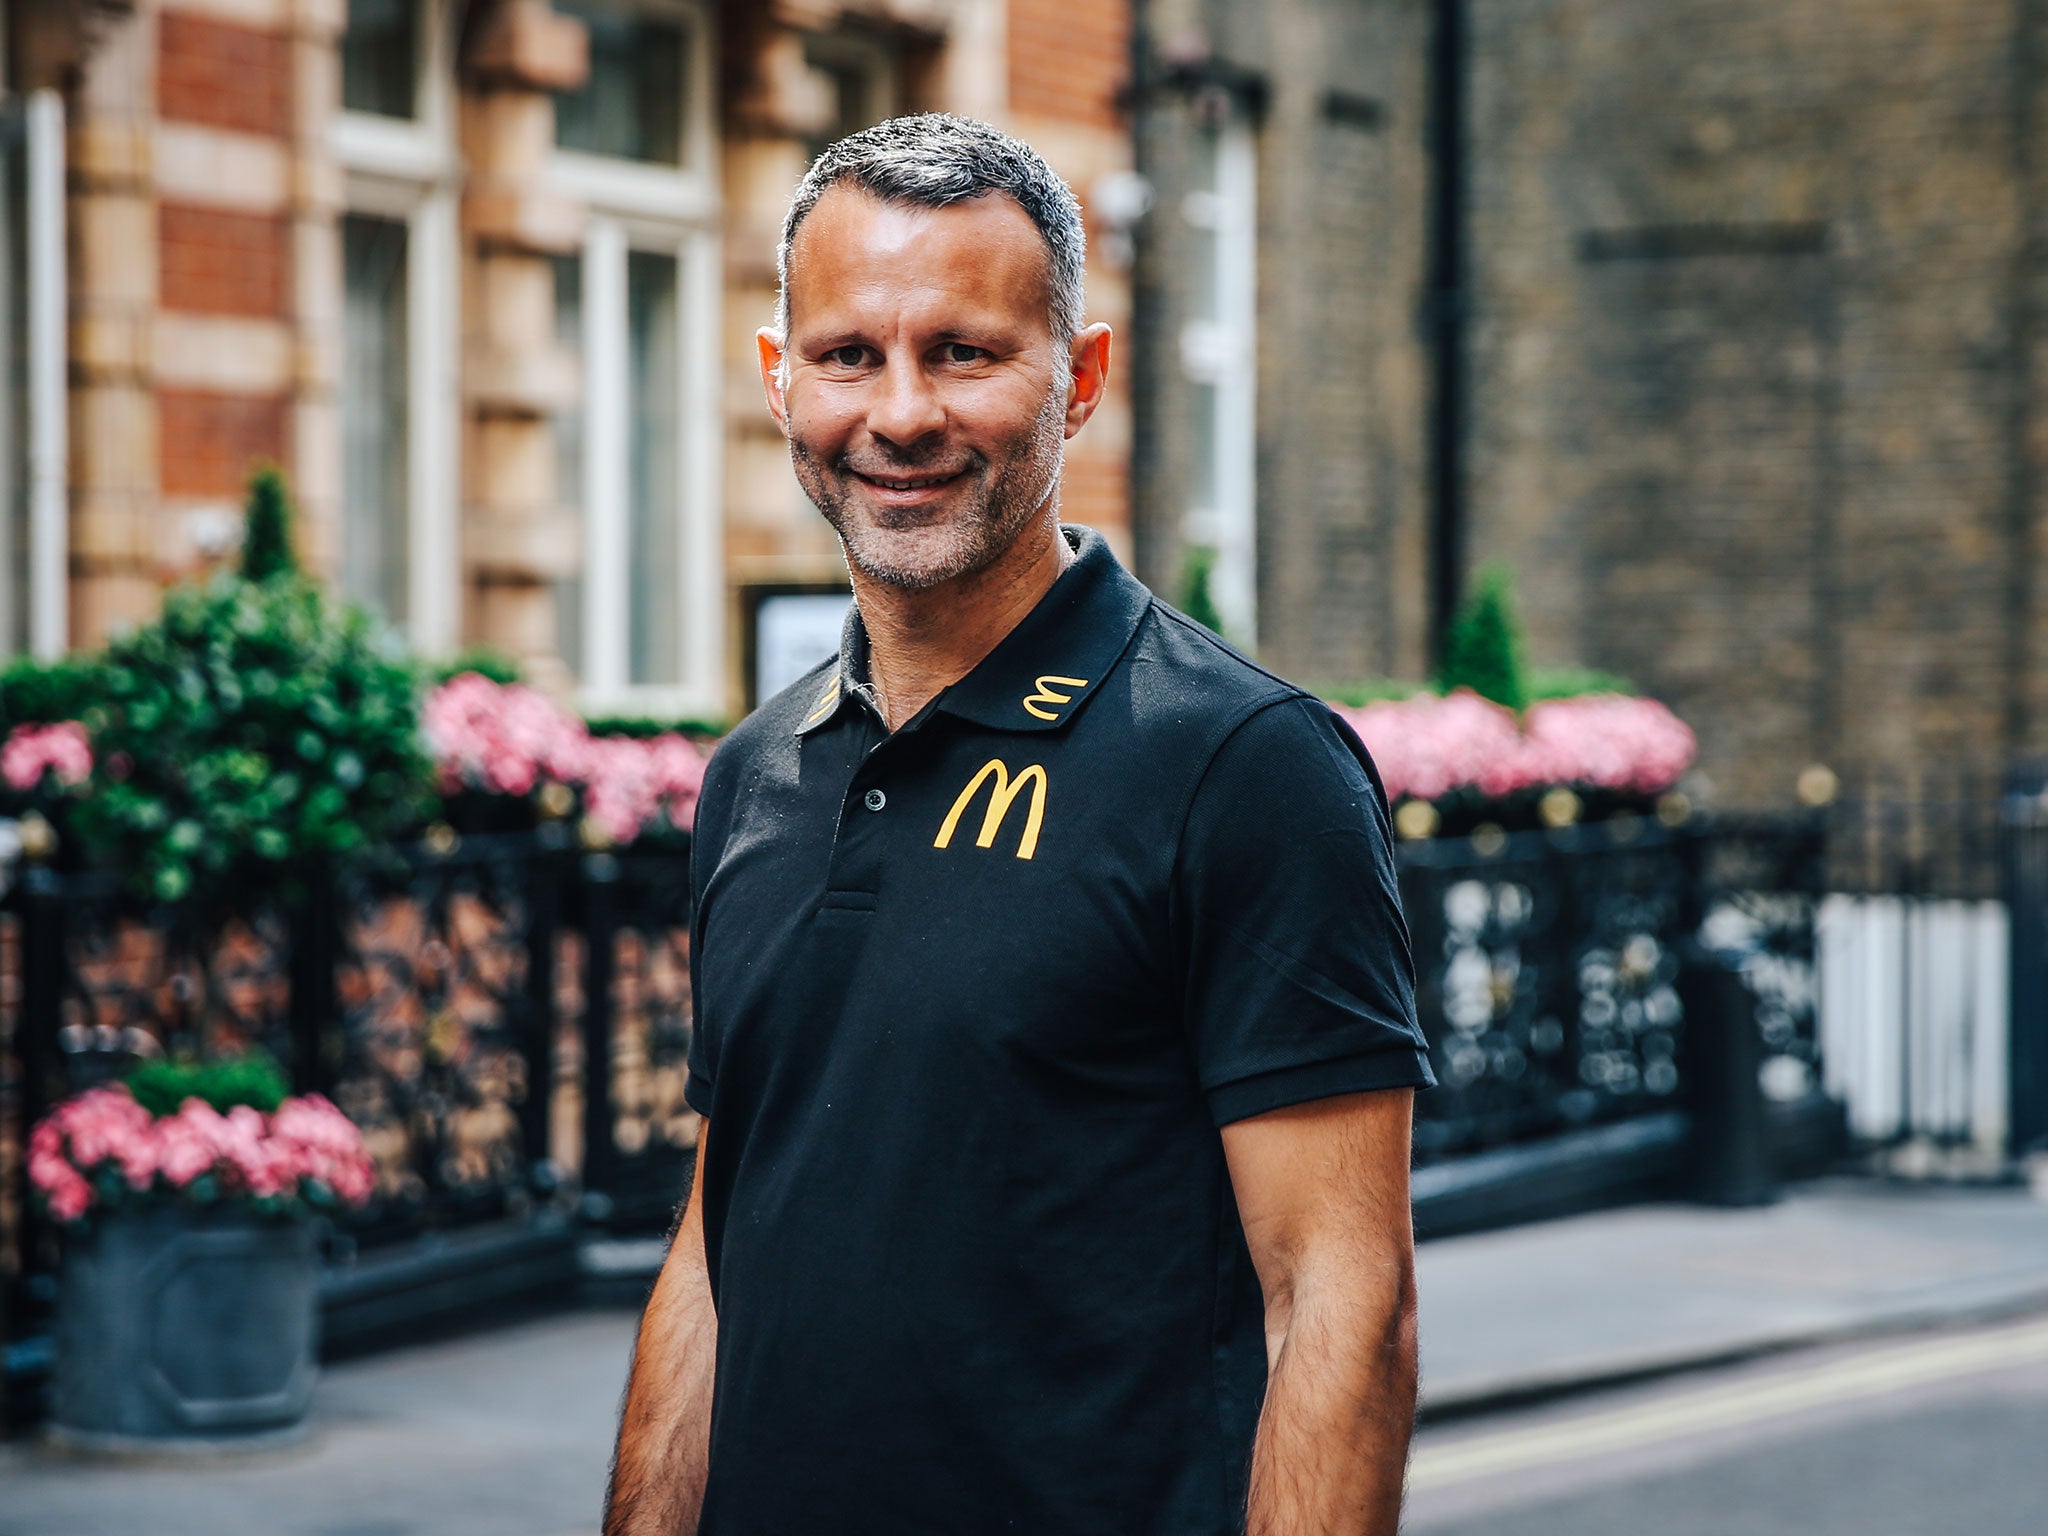 Ryan Giggs is currrently promoting the nomination period for the People’s Awards in the McDonald’s Community Awards